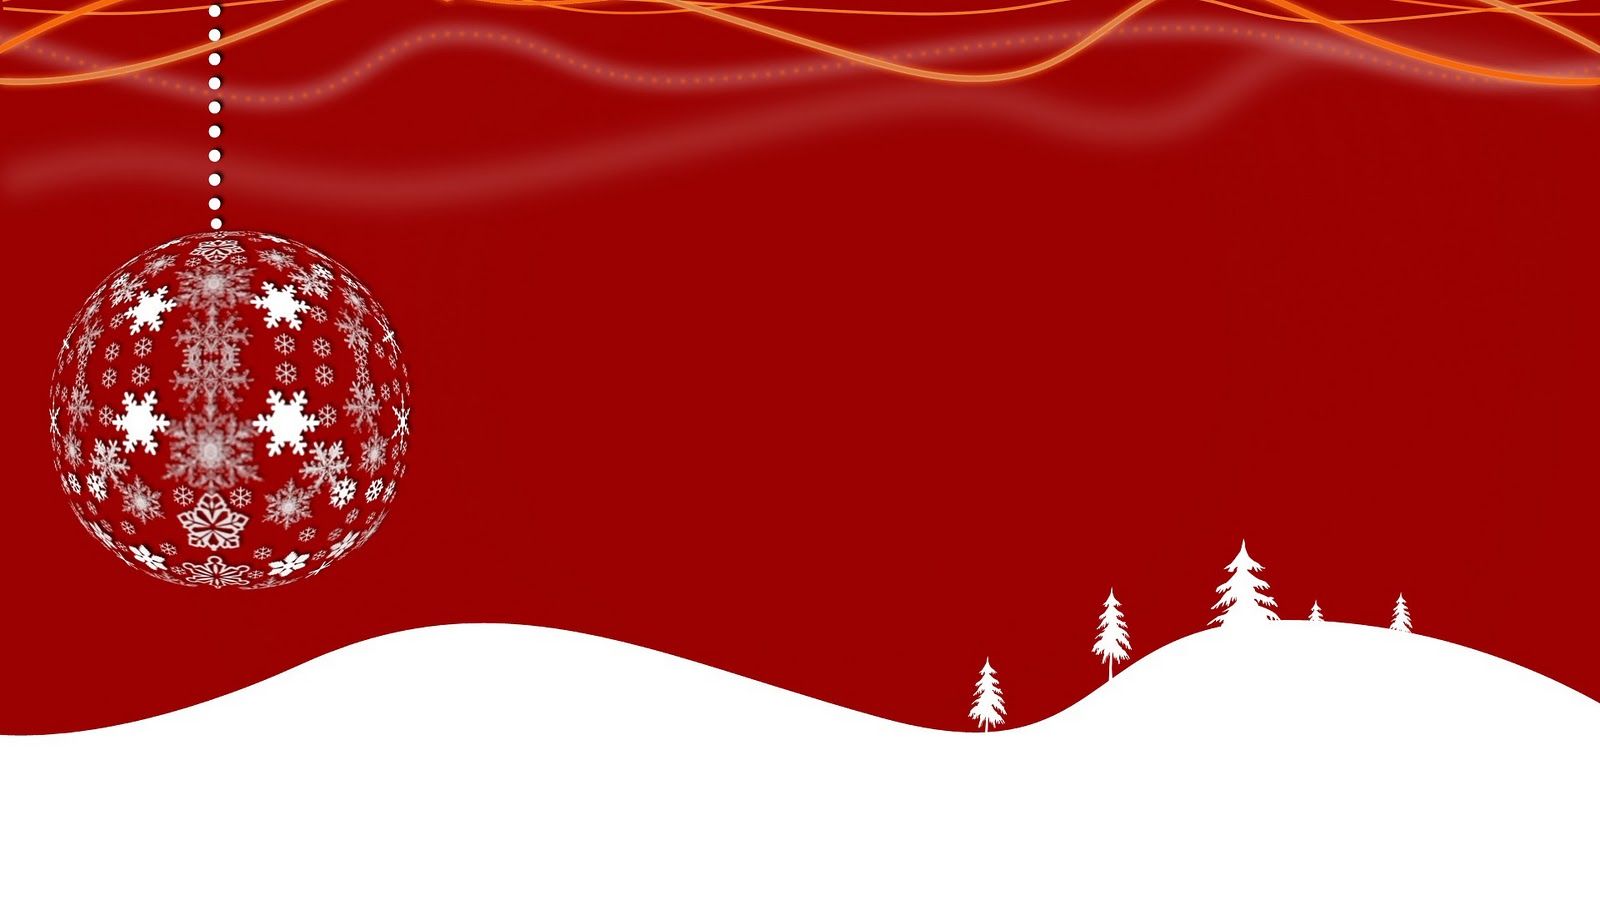 72+] Red Christmas Backgrounds